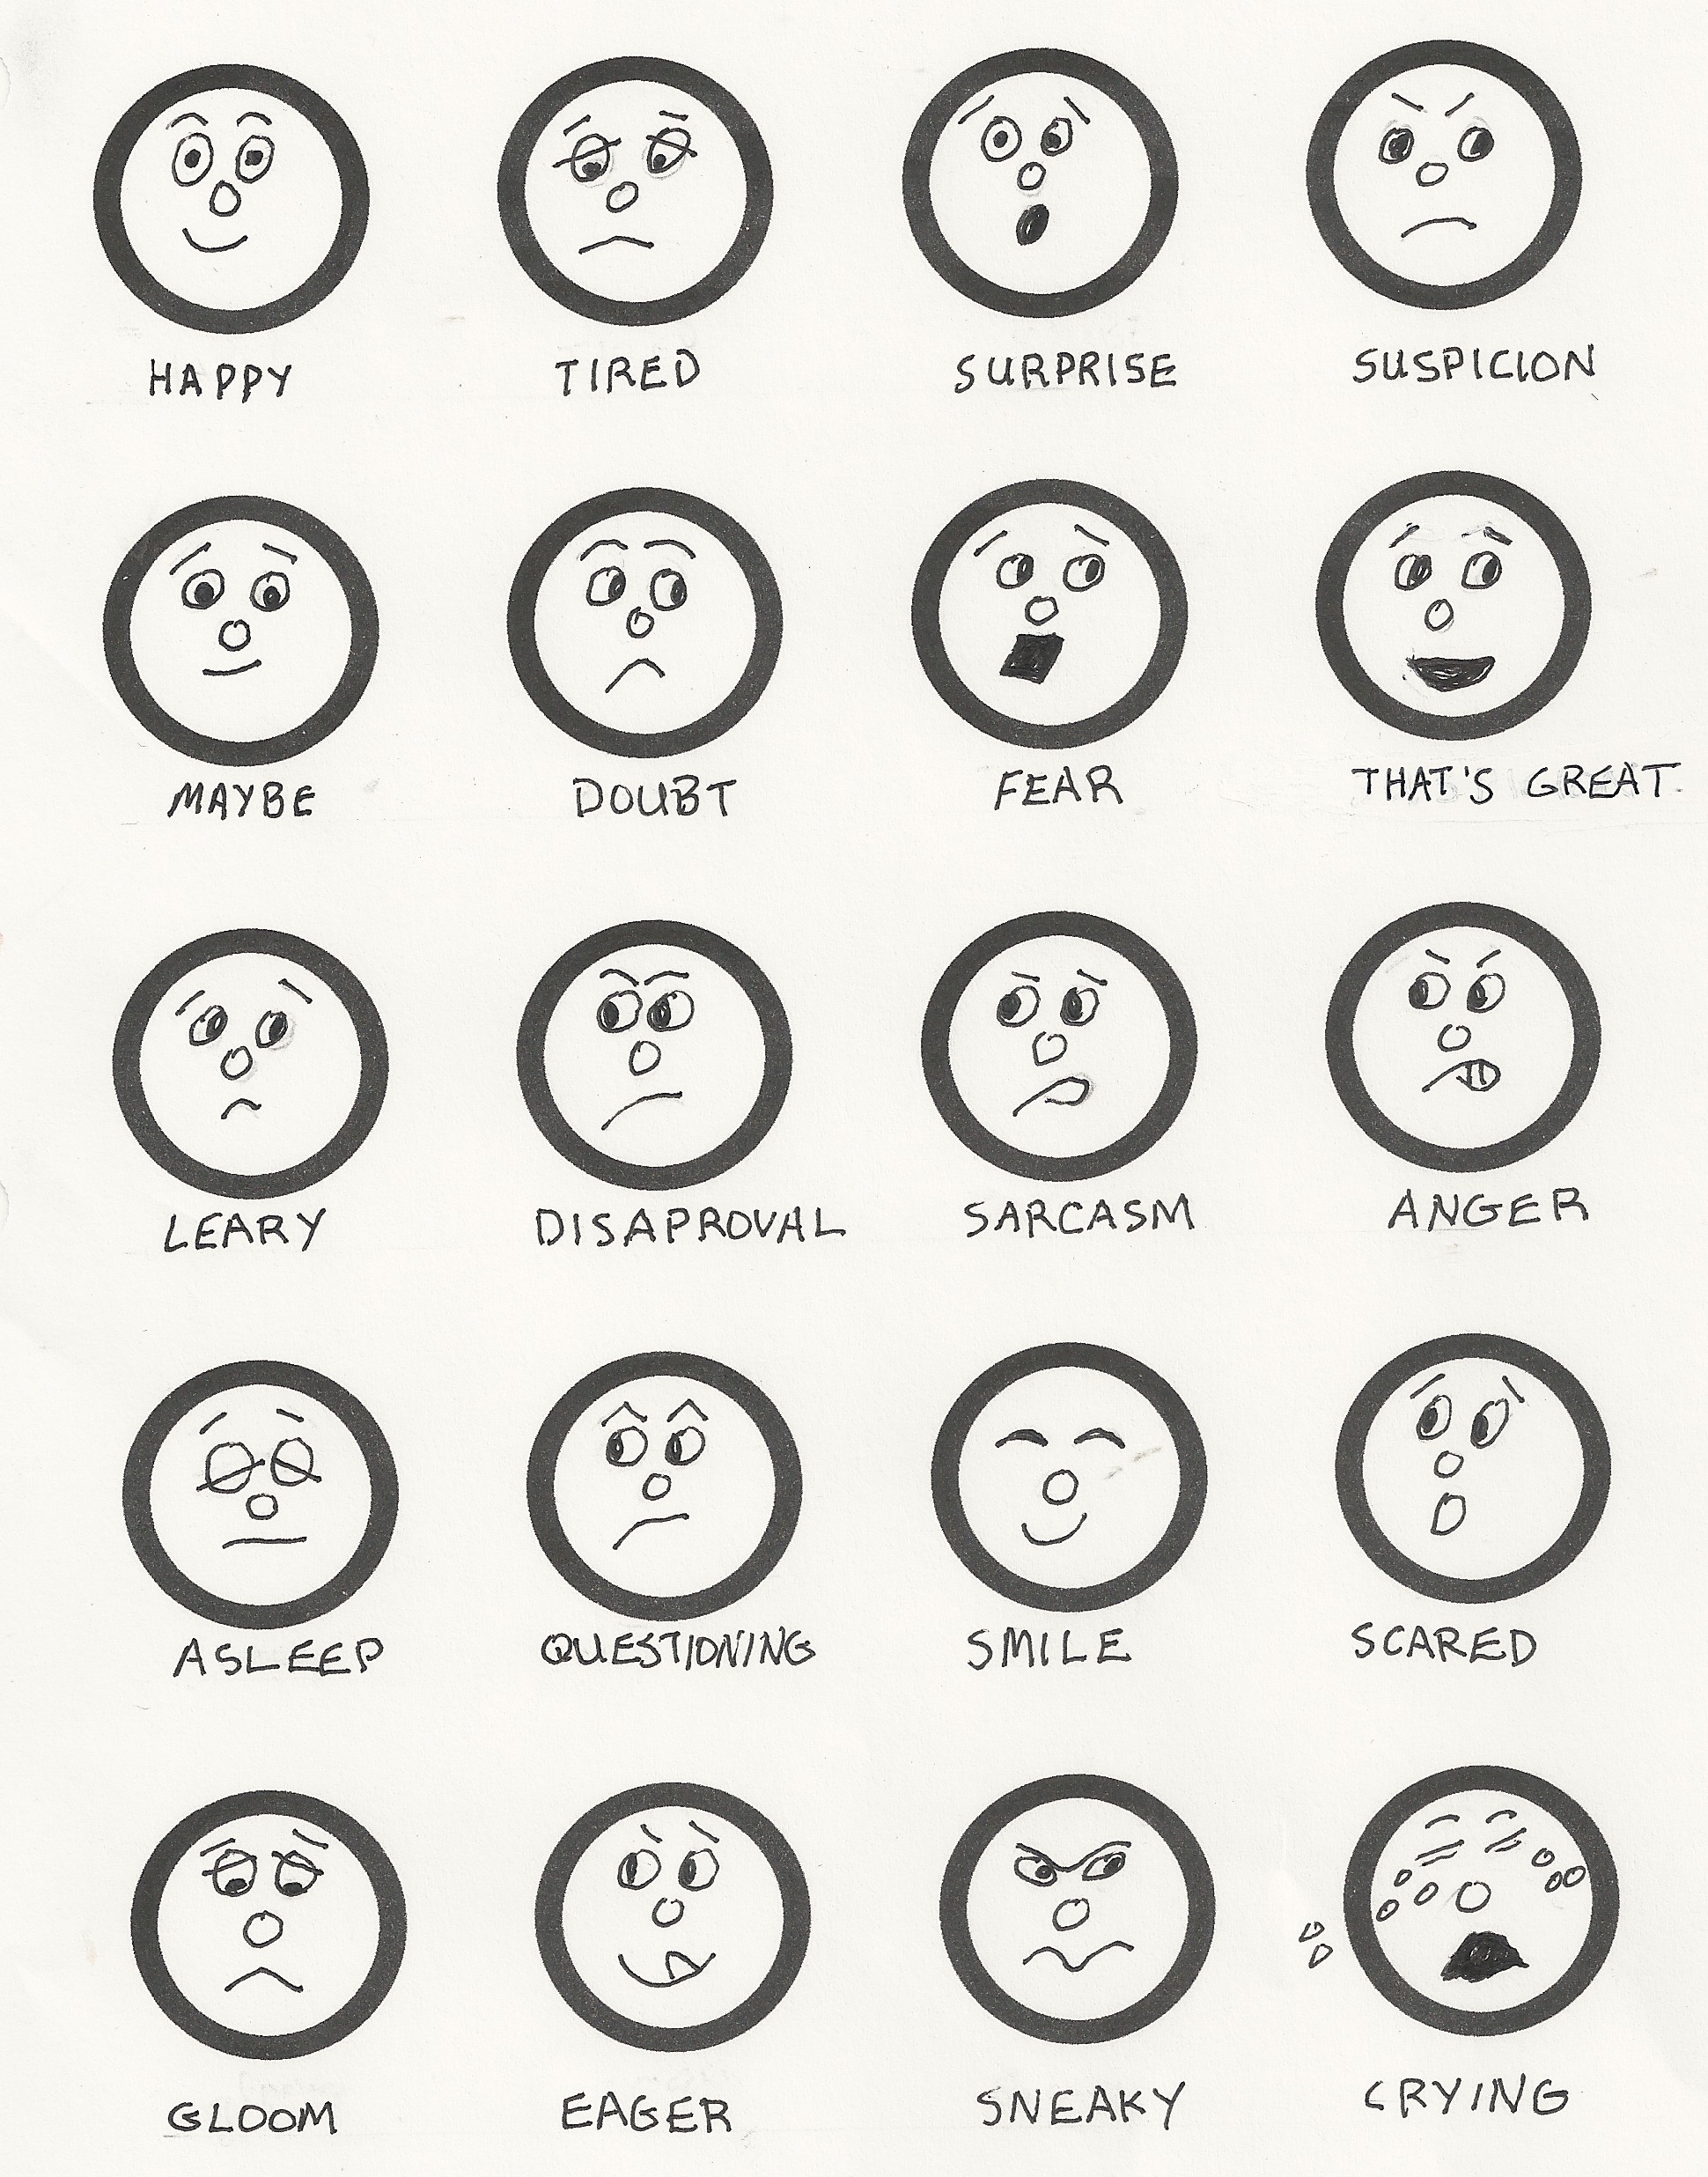 Cartoon Facial Expressions: How to Draw and Use Them in Your Art